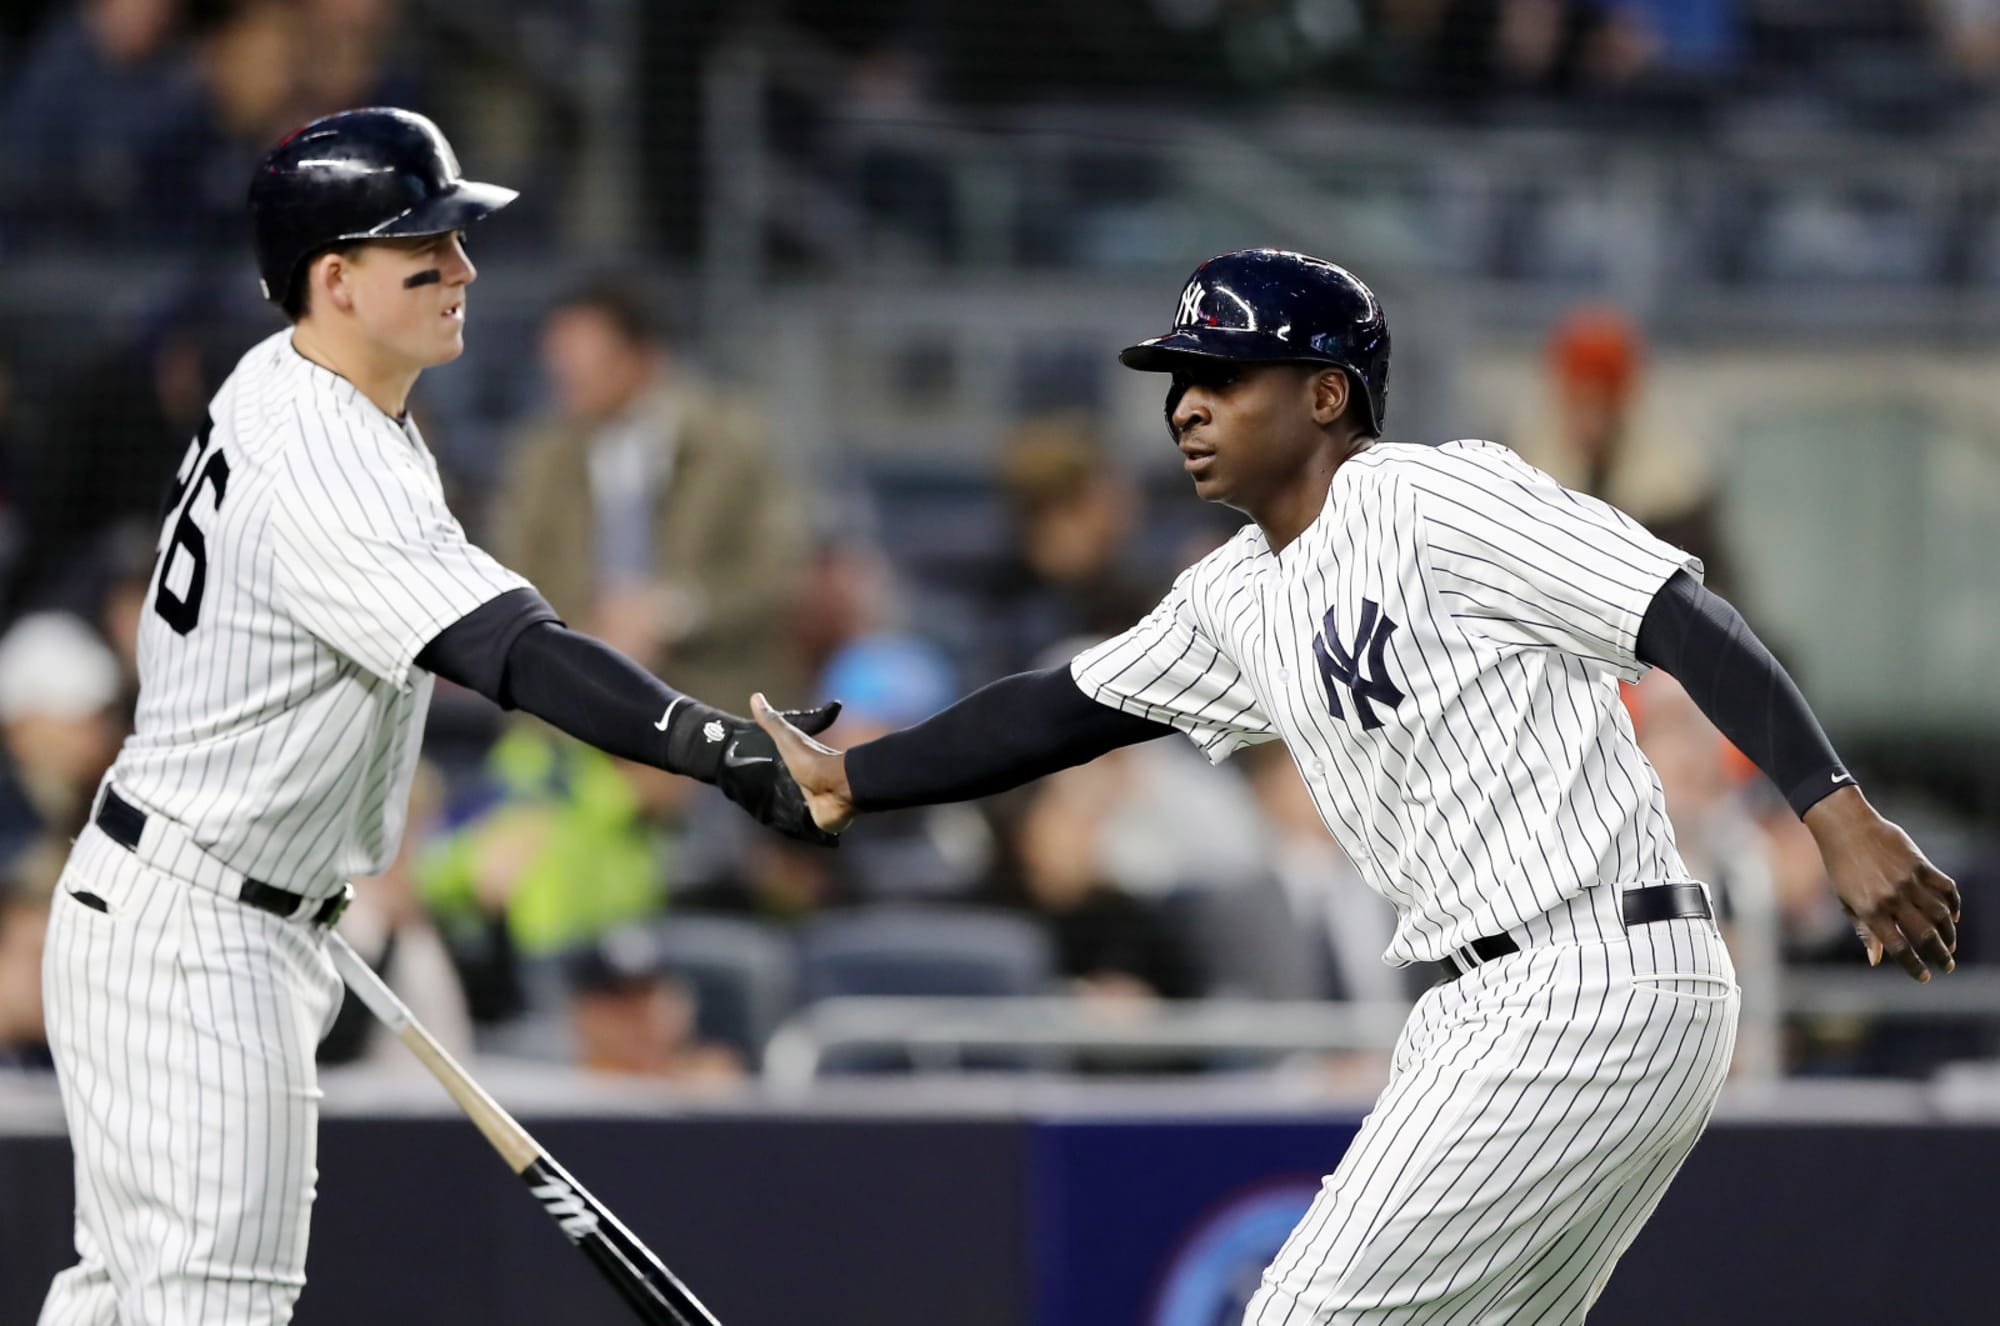 Yankees look to continue dominance following Twins series